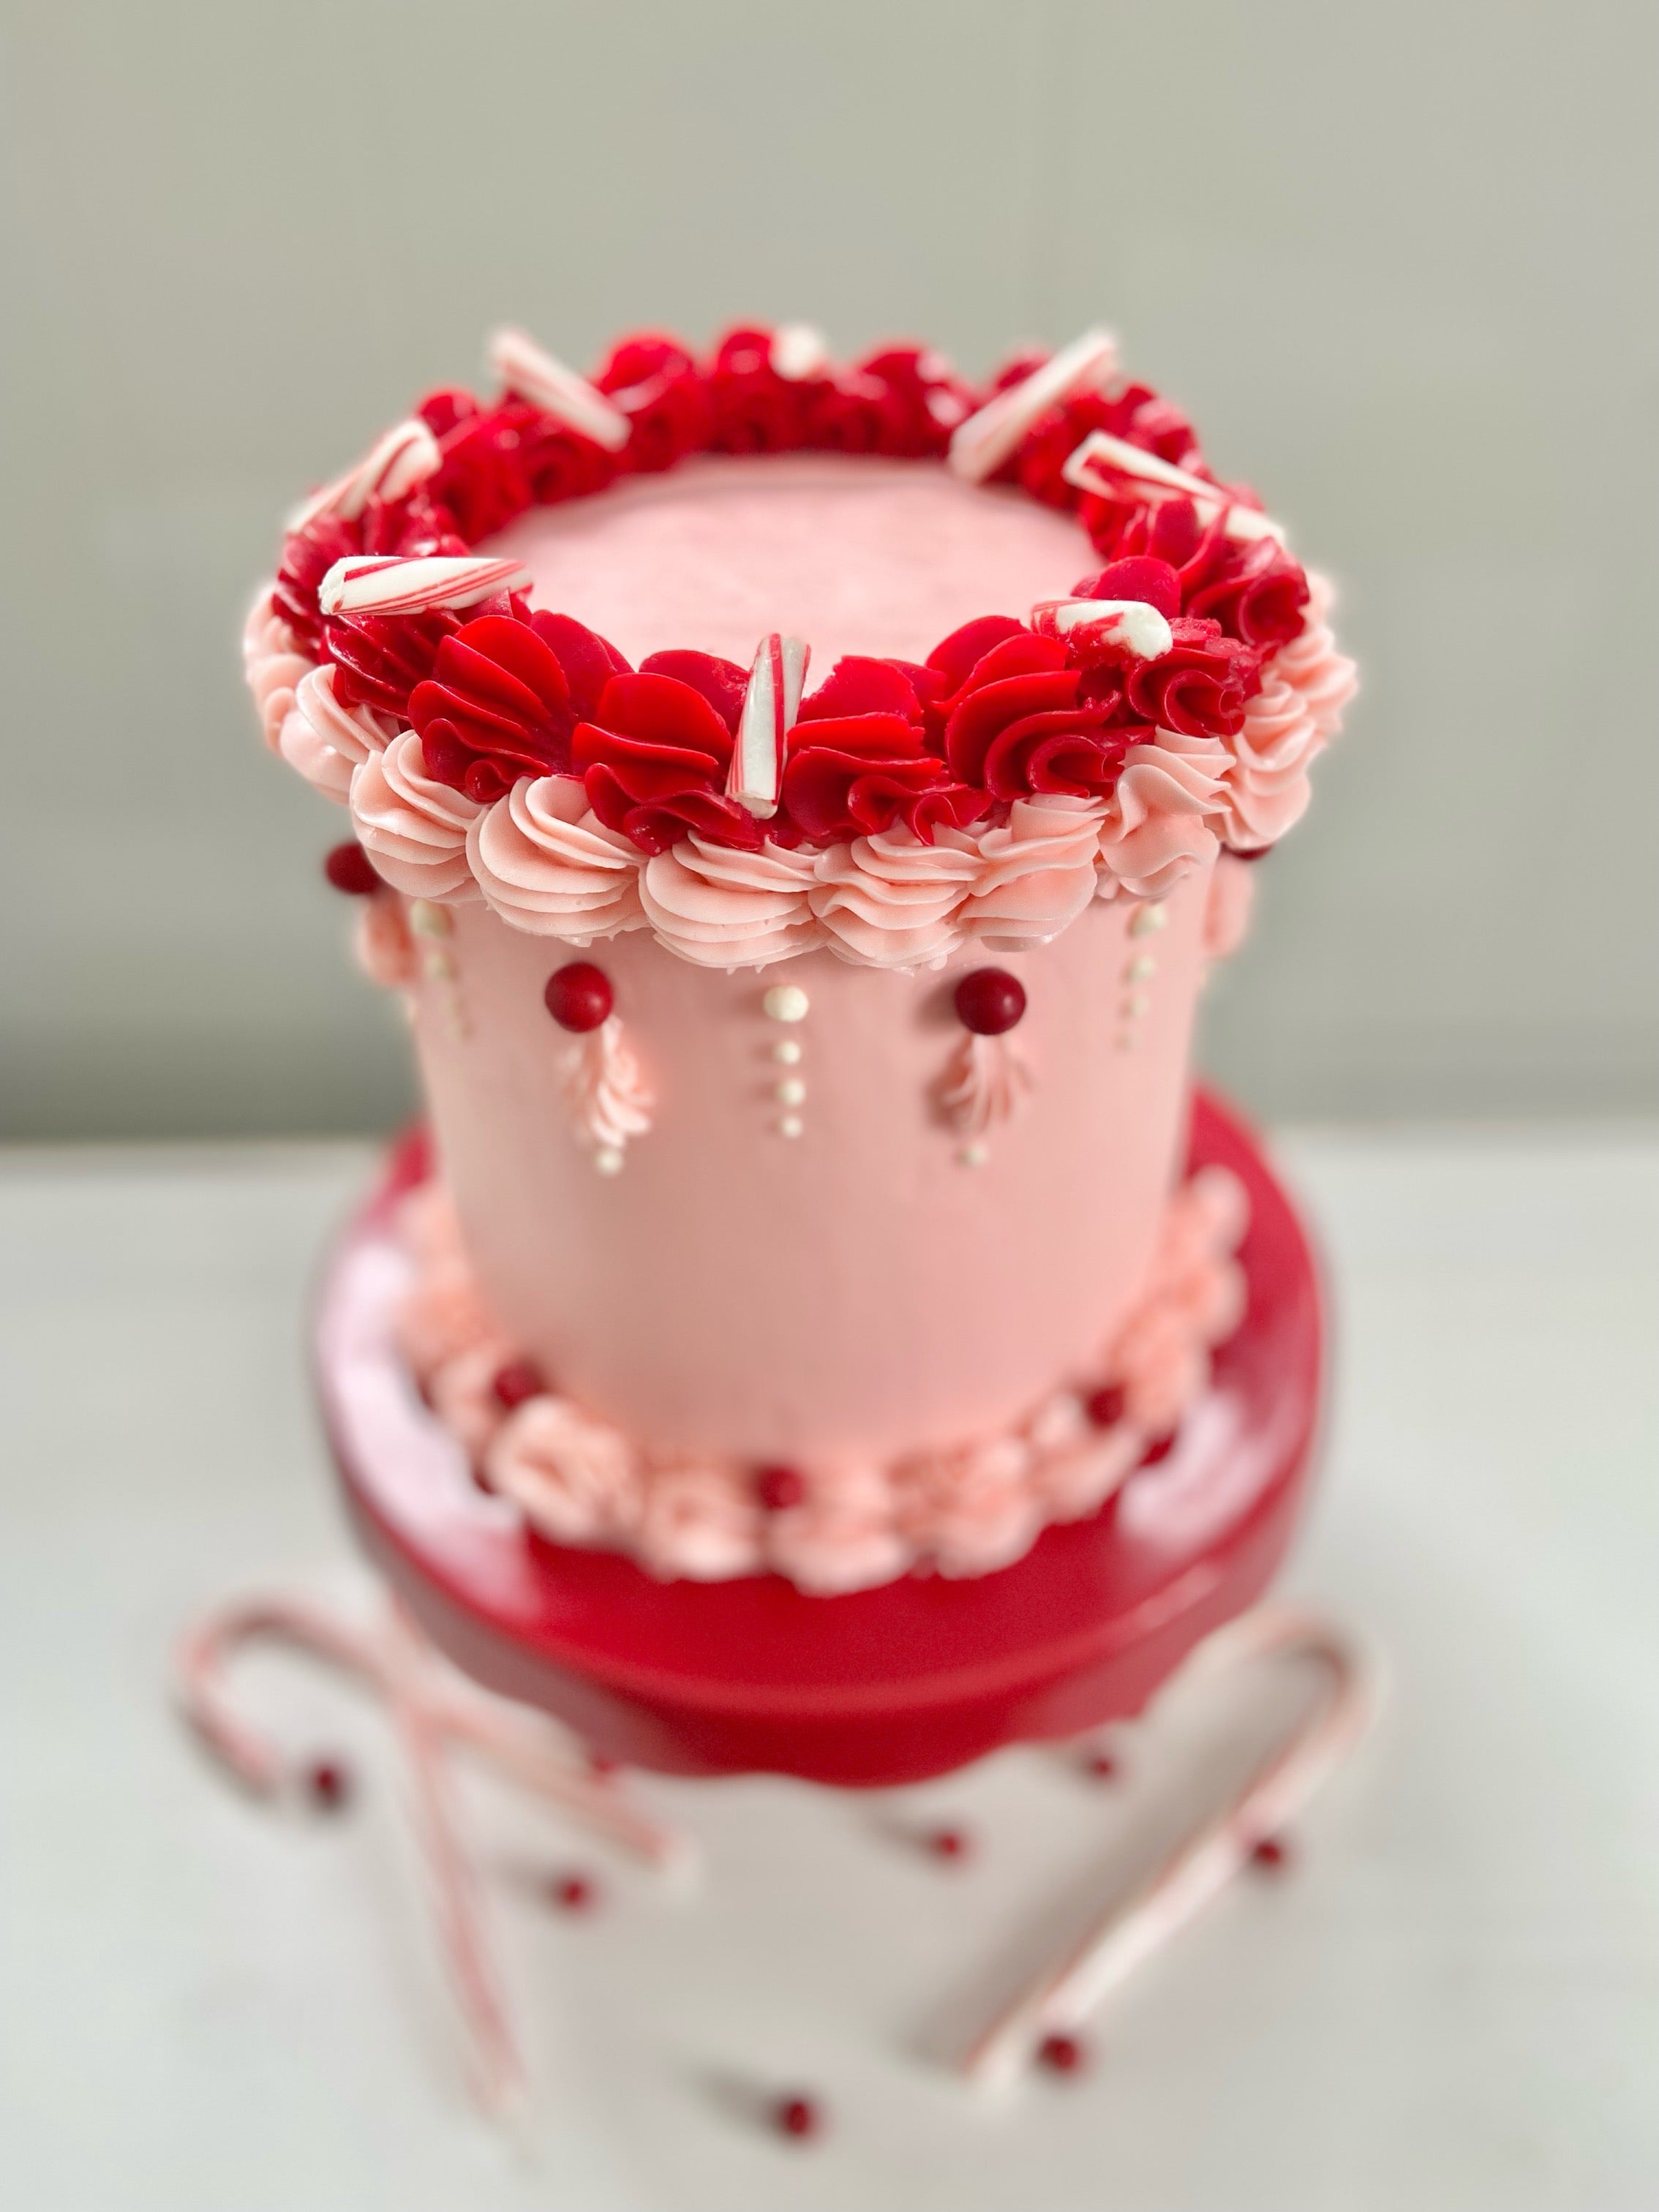 Pink Peppermint Cake | The Cake Blog